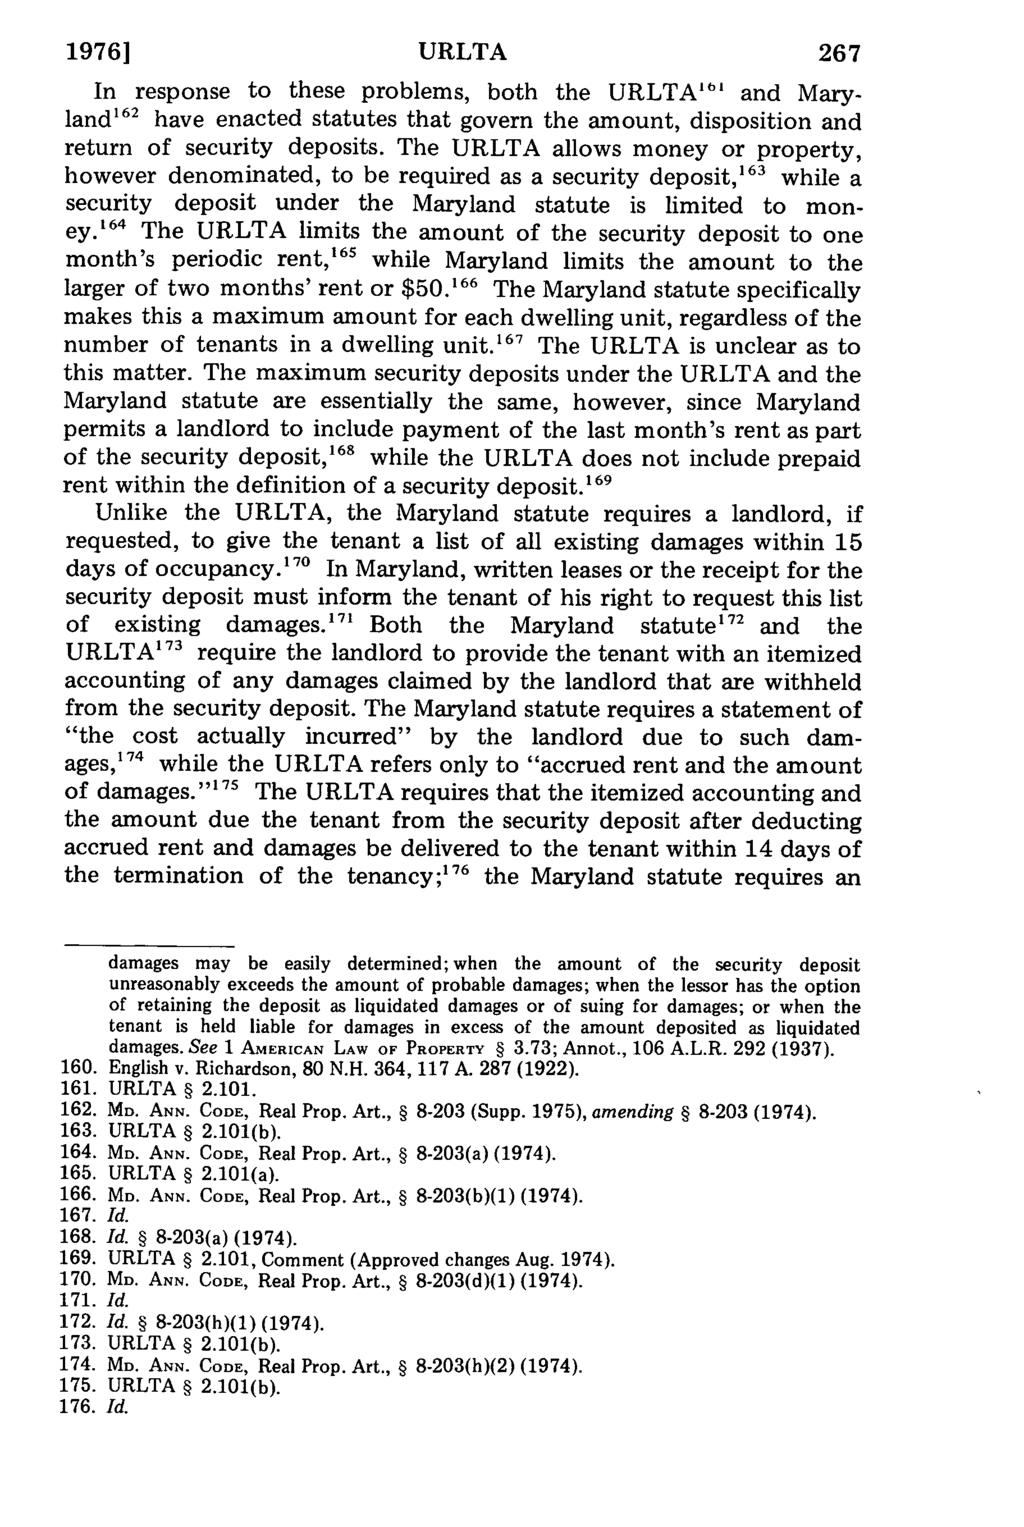 19761 URLTA 267 In response to these problems, both the URLTA"' and Maryland 162 have enacted statutes that govern the amount, disposition and return of security deposits.